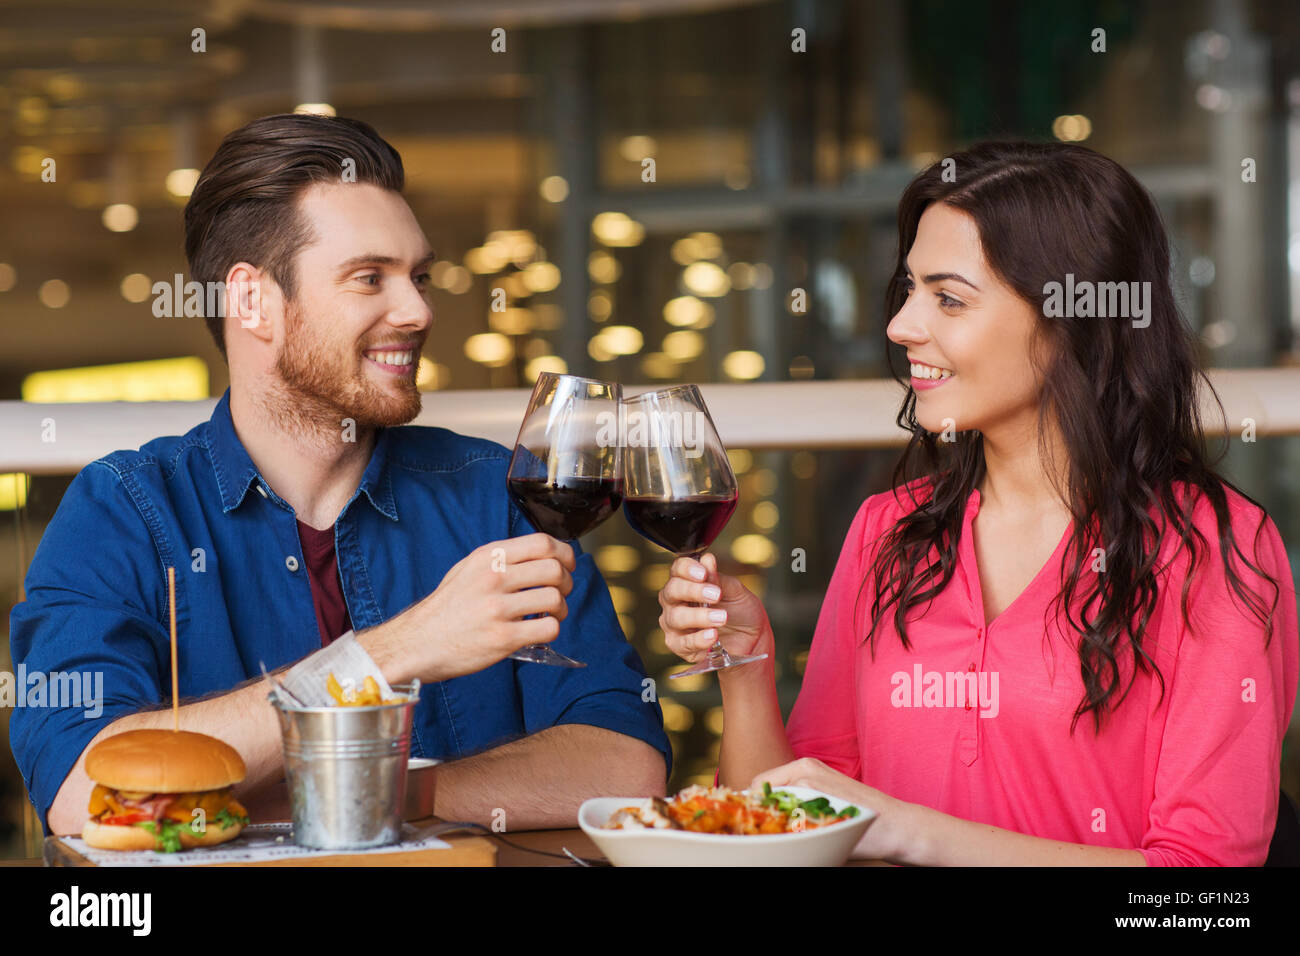 happy couple dining and drink wine at restaurant Stock Photo